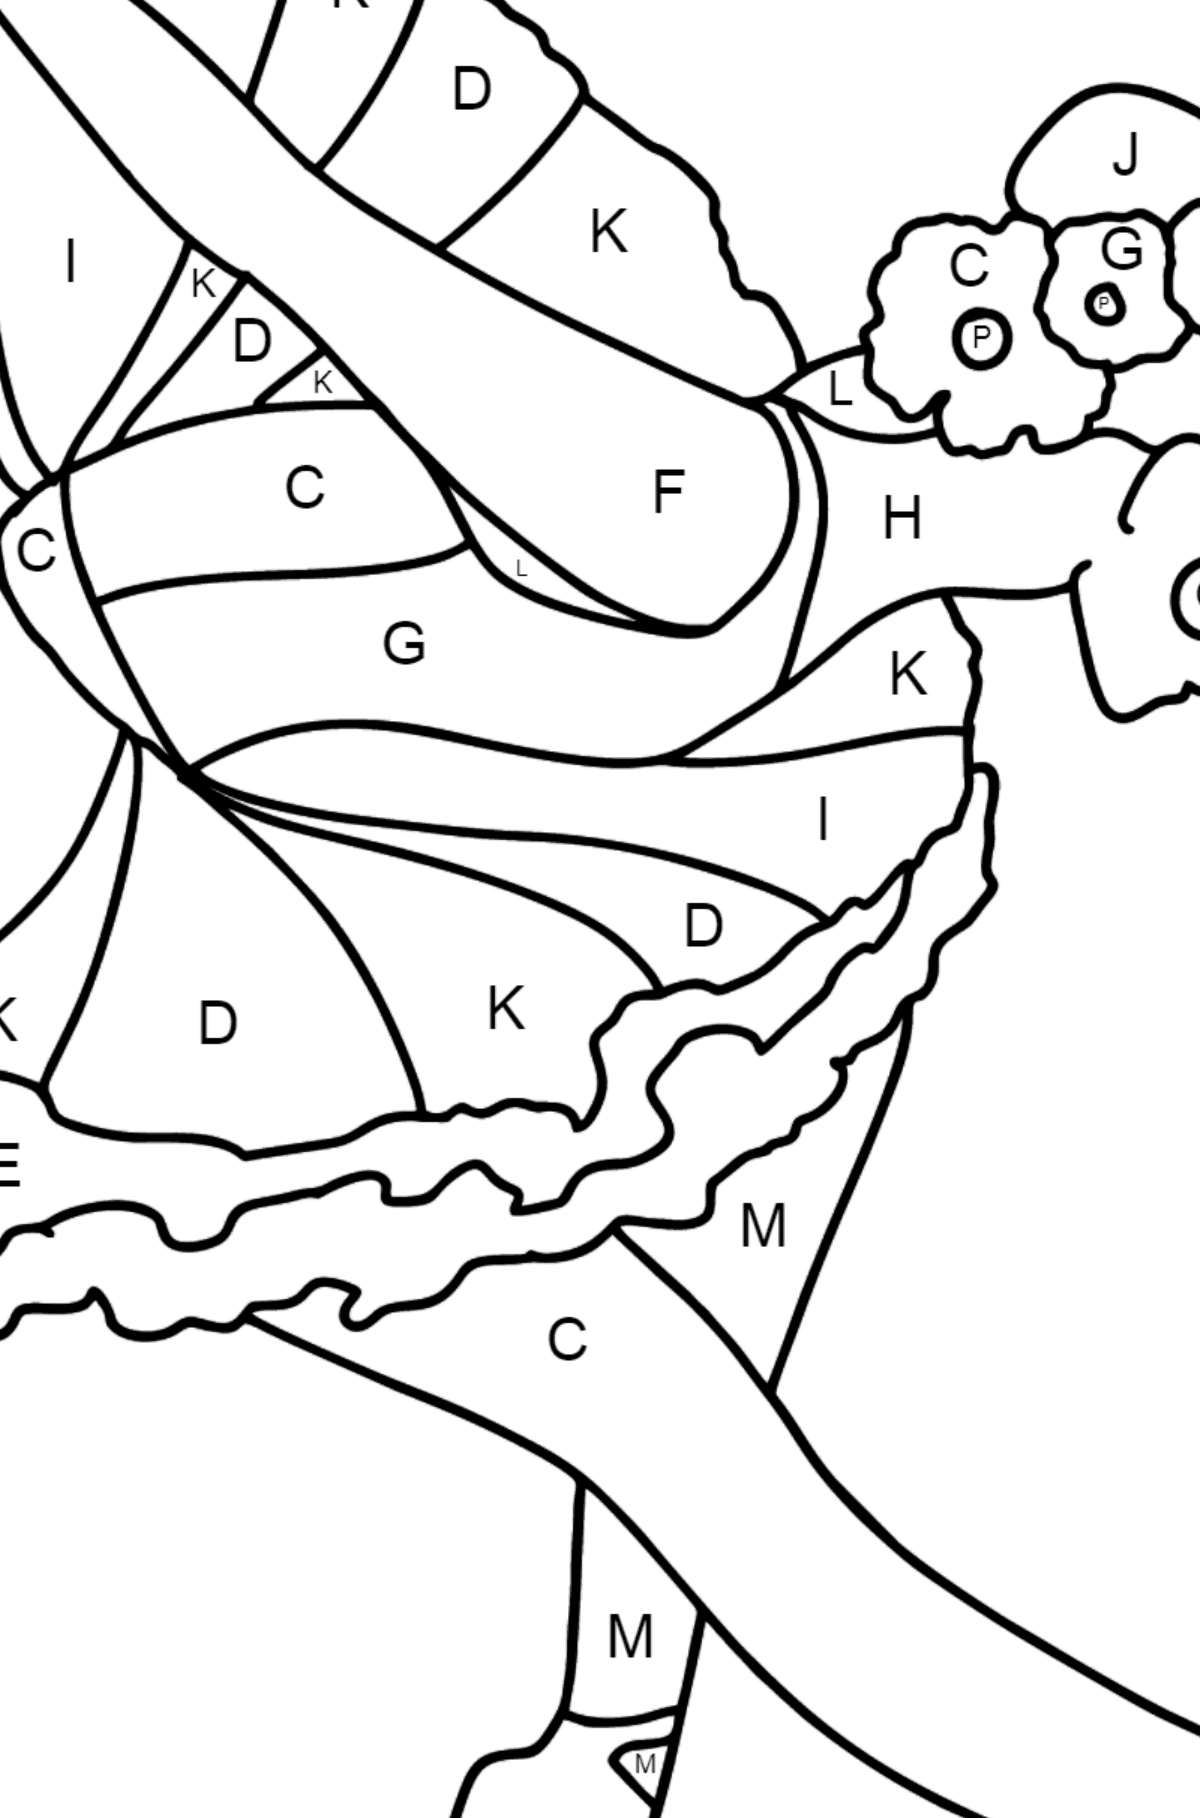 Ballerina Bowing coloring page - Coloring by Letters for Kids